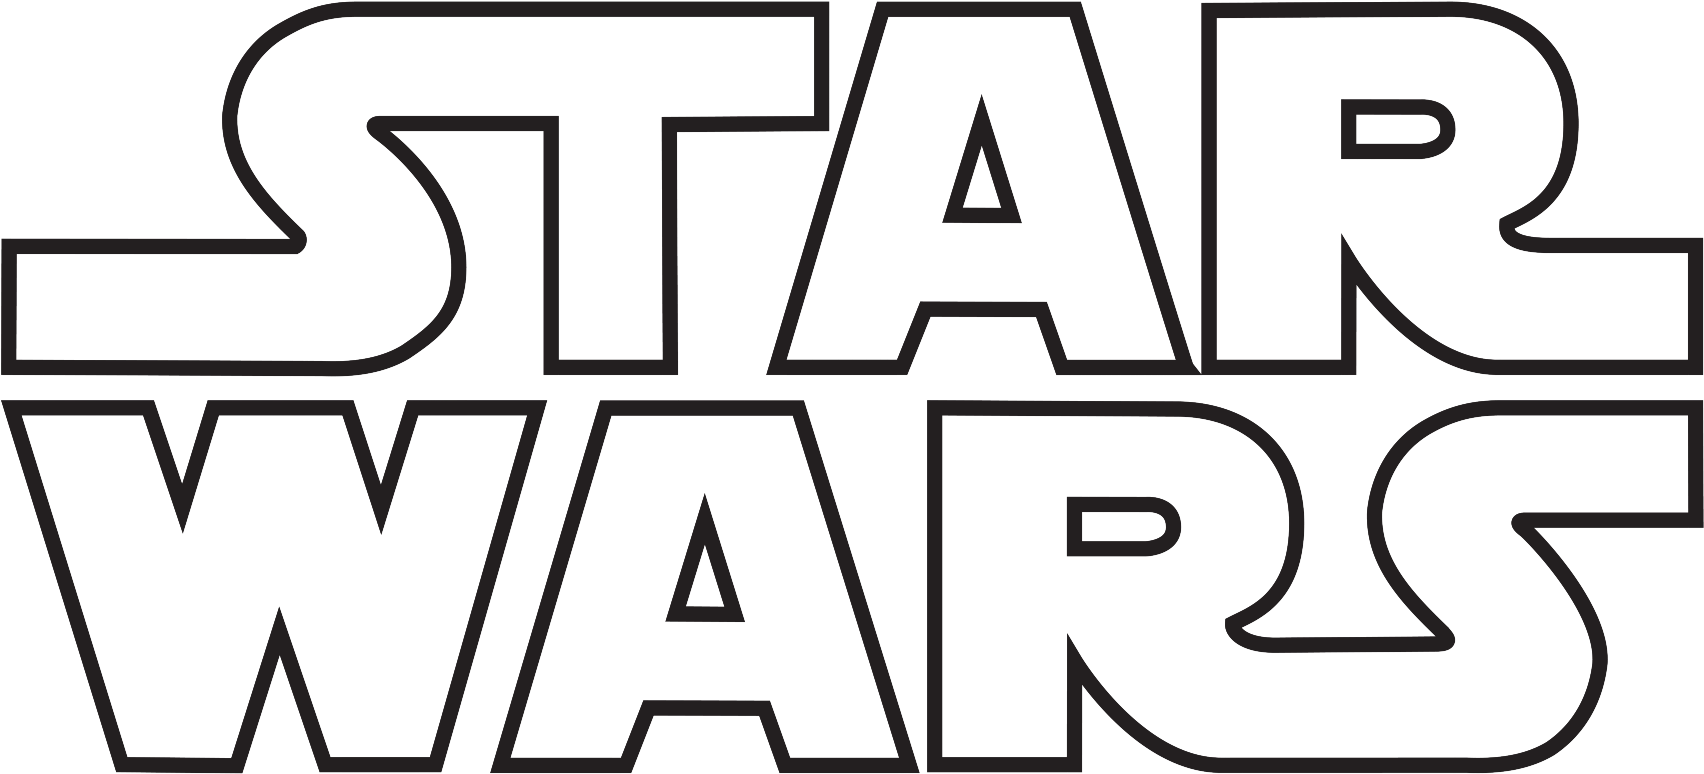 Free Black And White Star Wars Pictures, Download Free Black And White